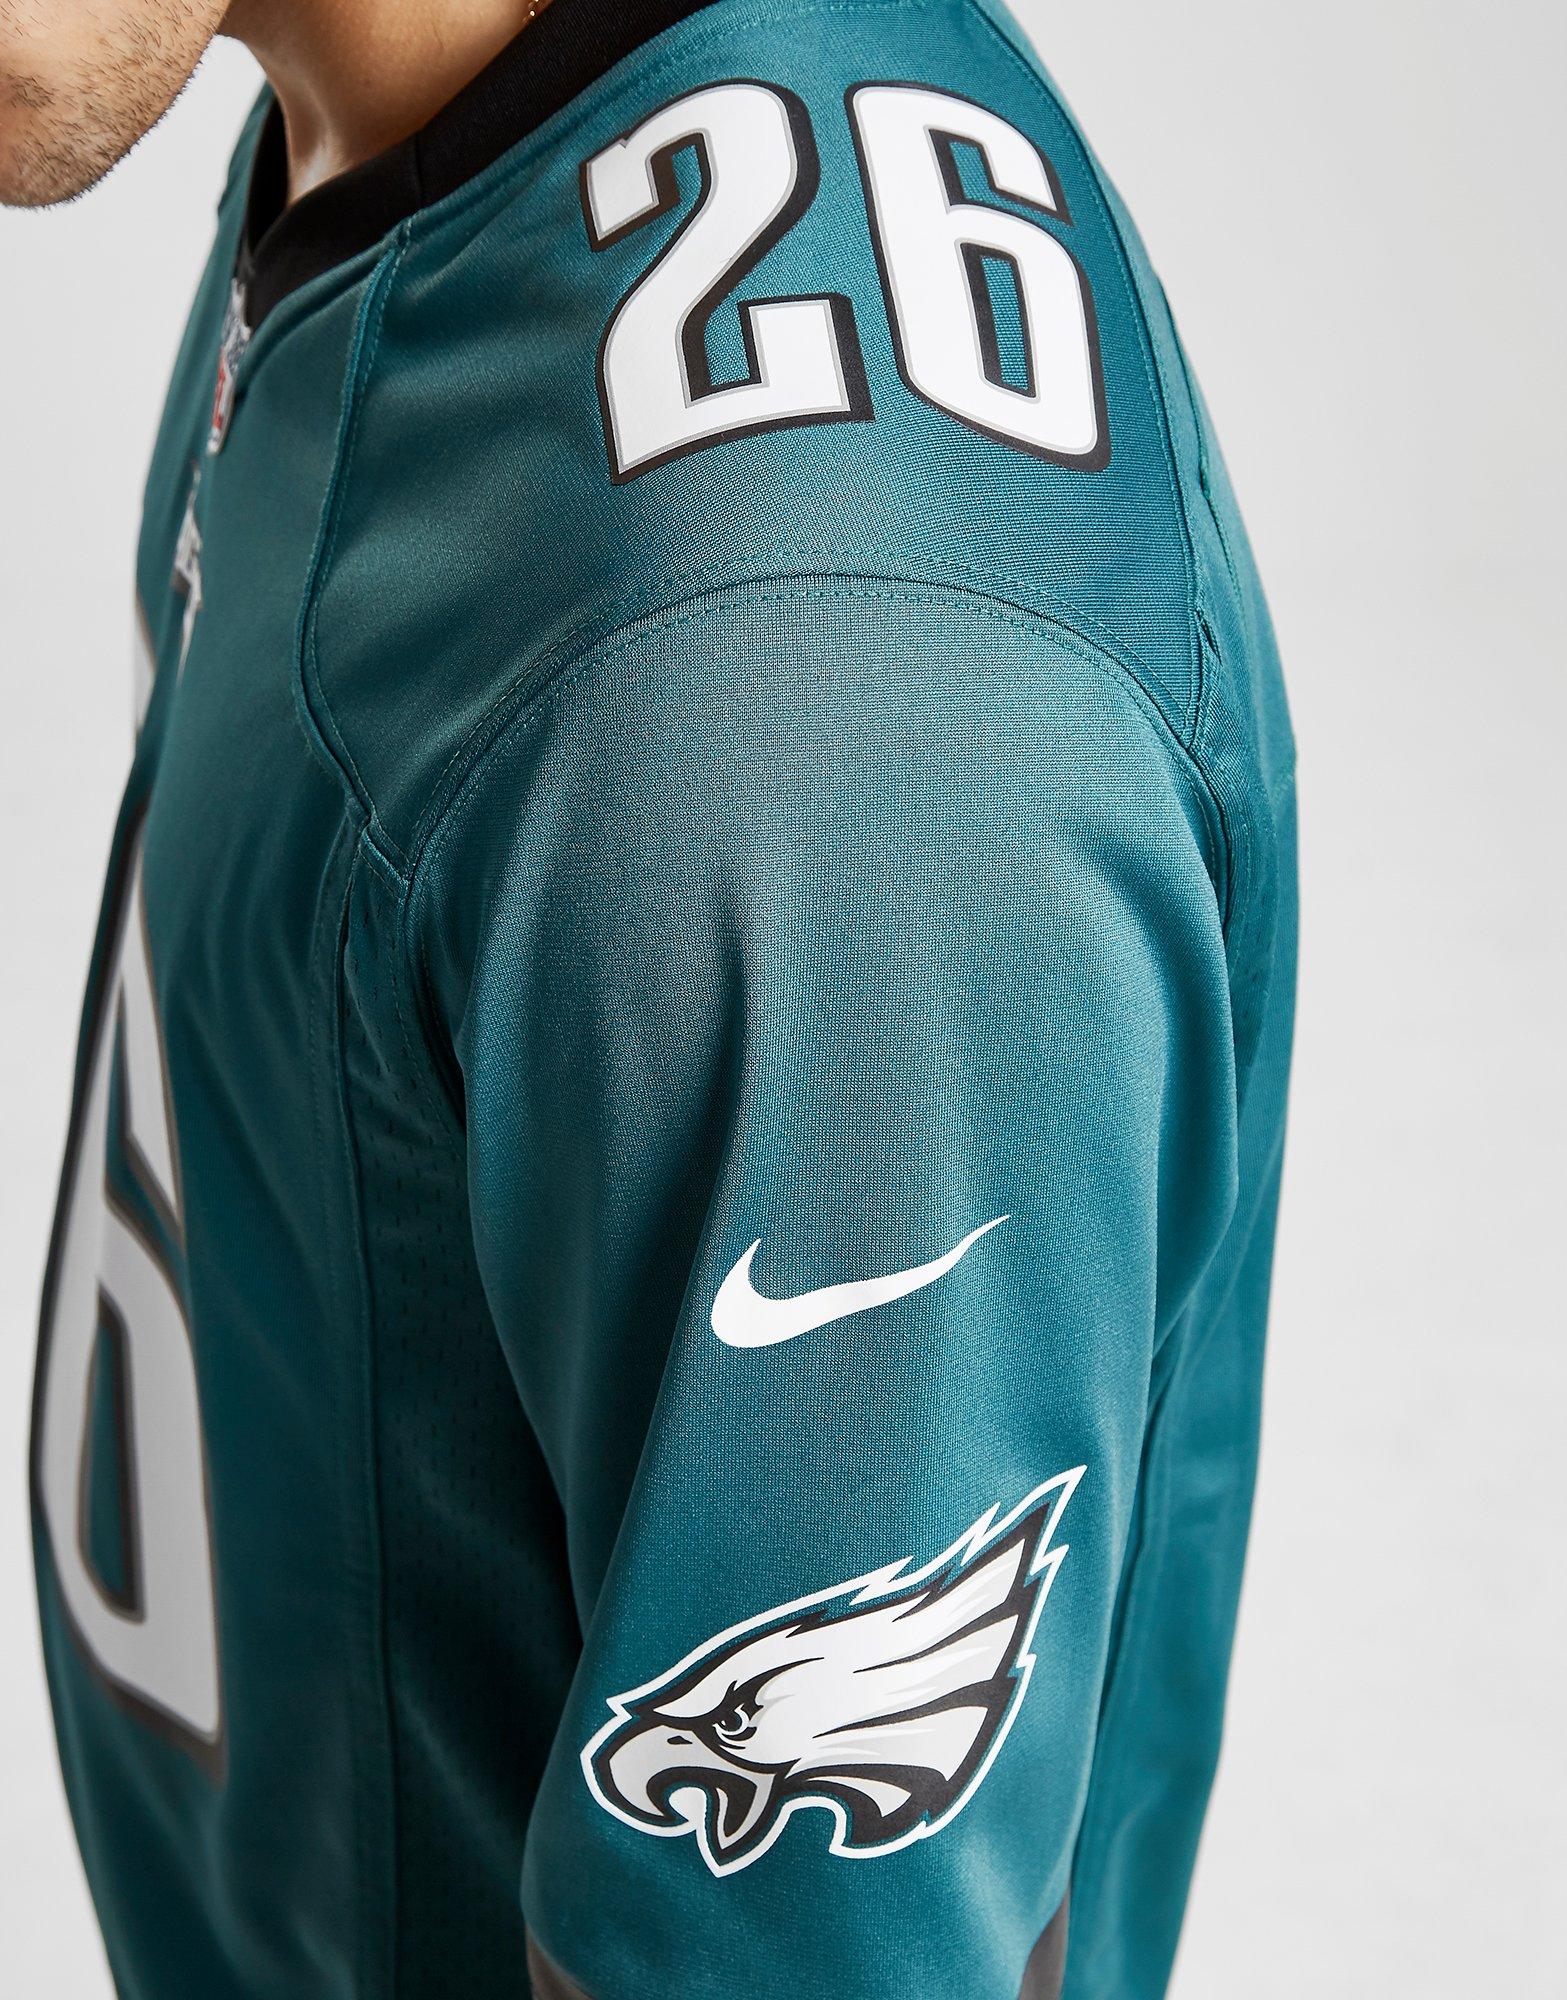 eagles 26 jersey